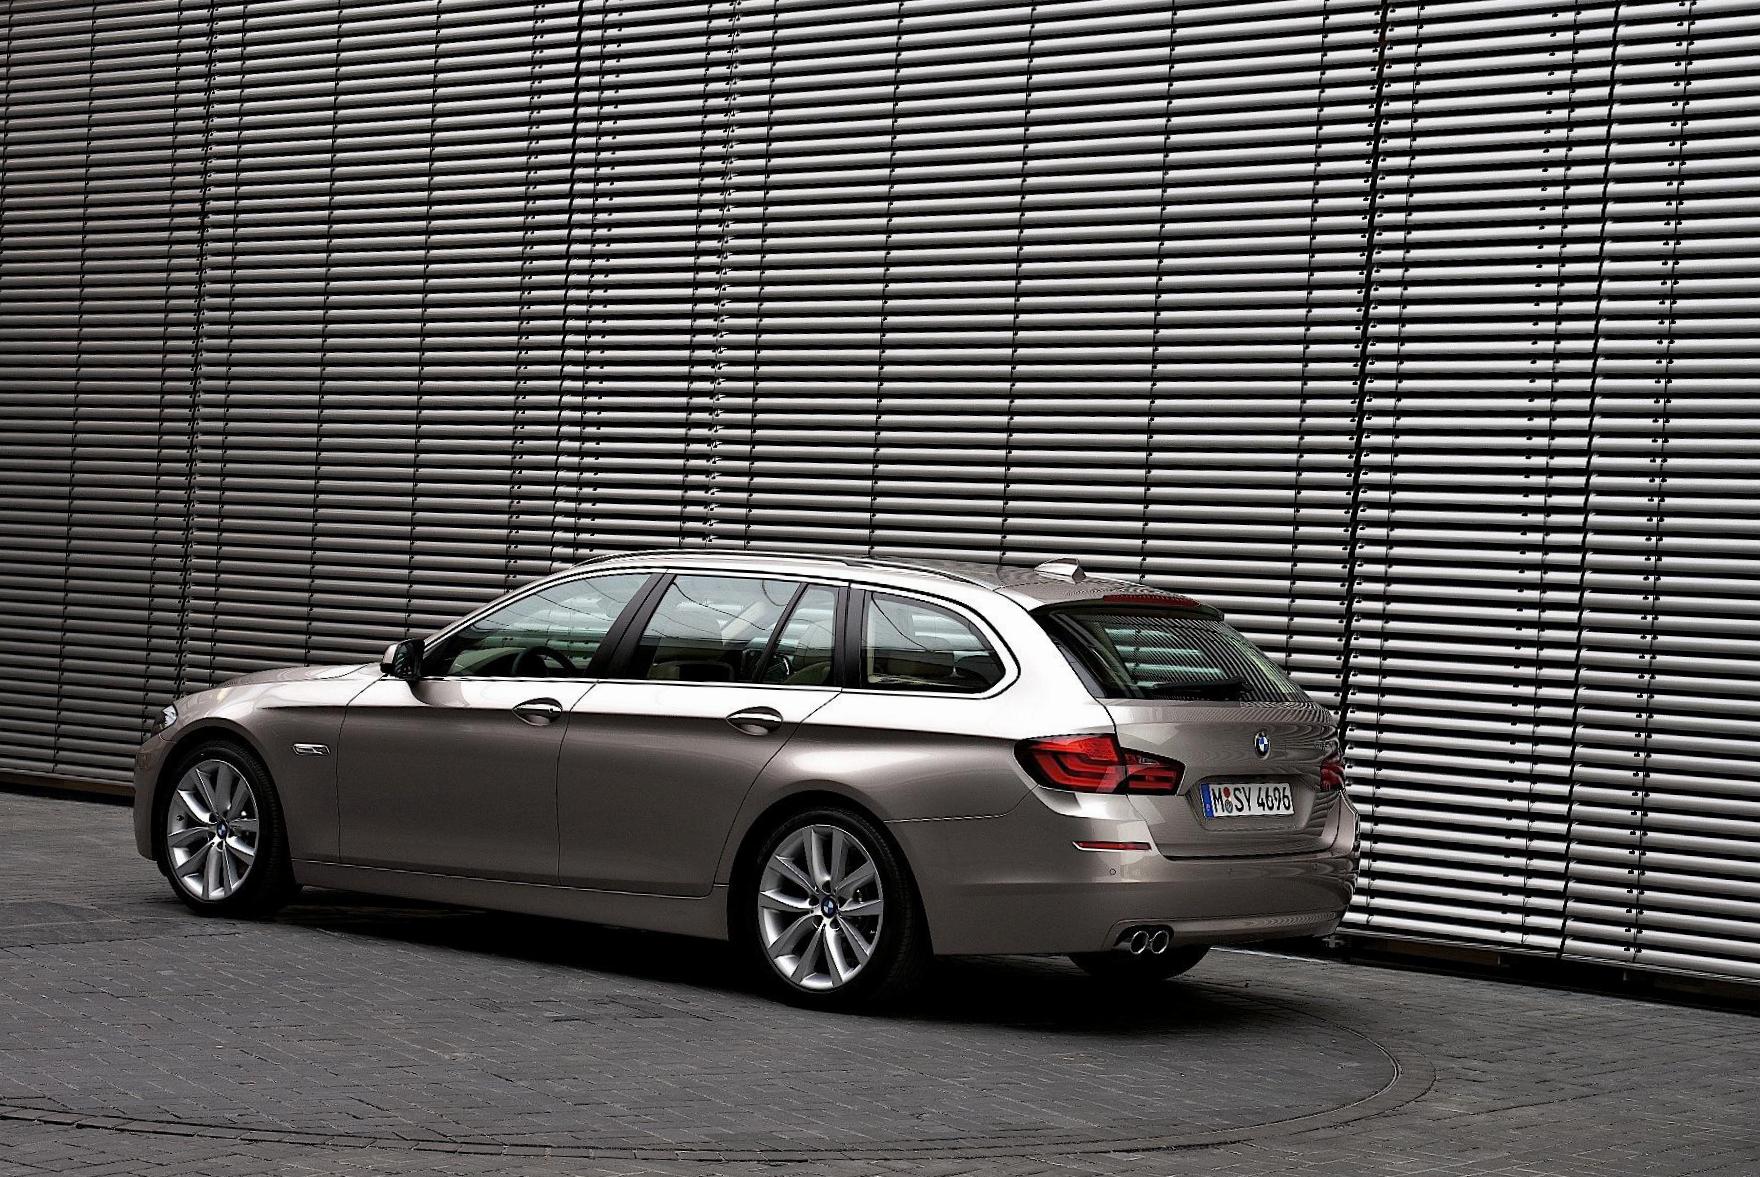 5 Series Touring (F11) BMW used 2007